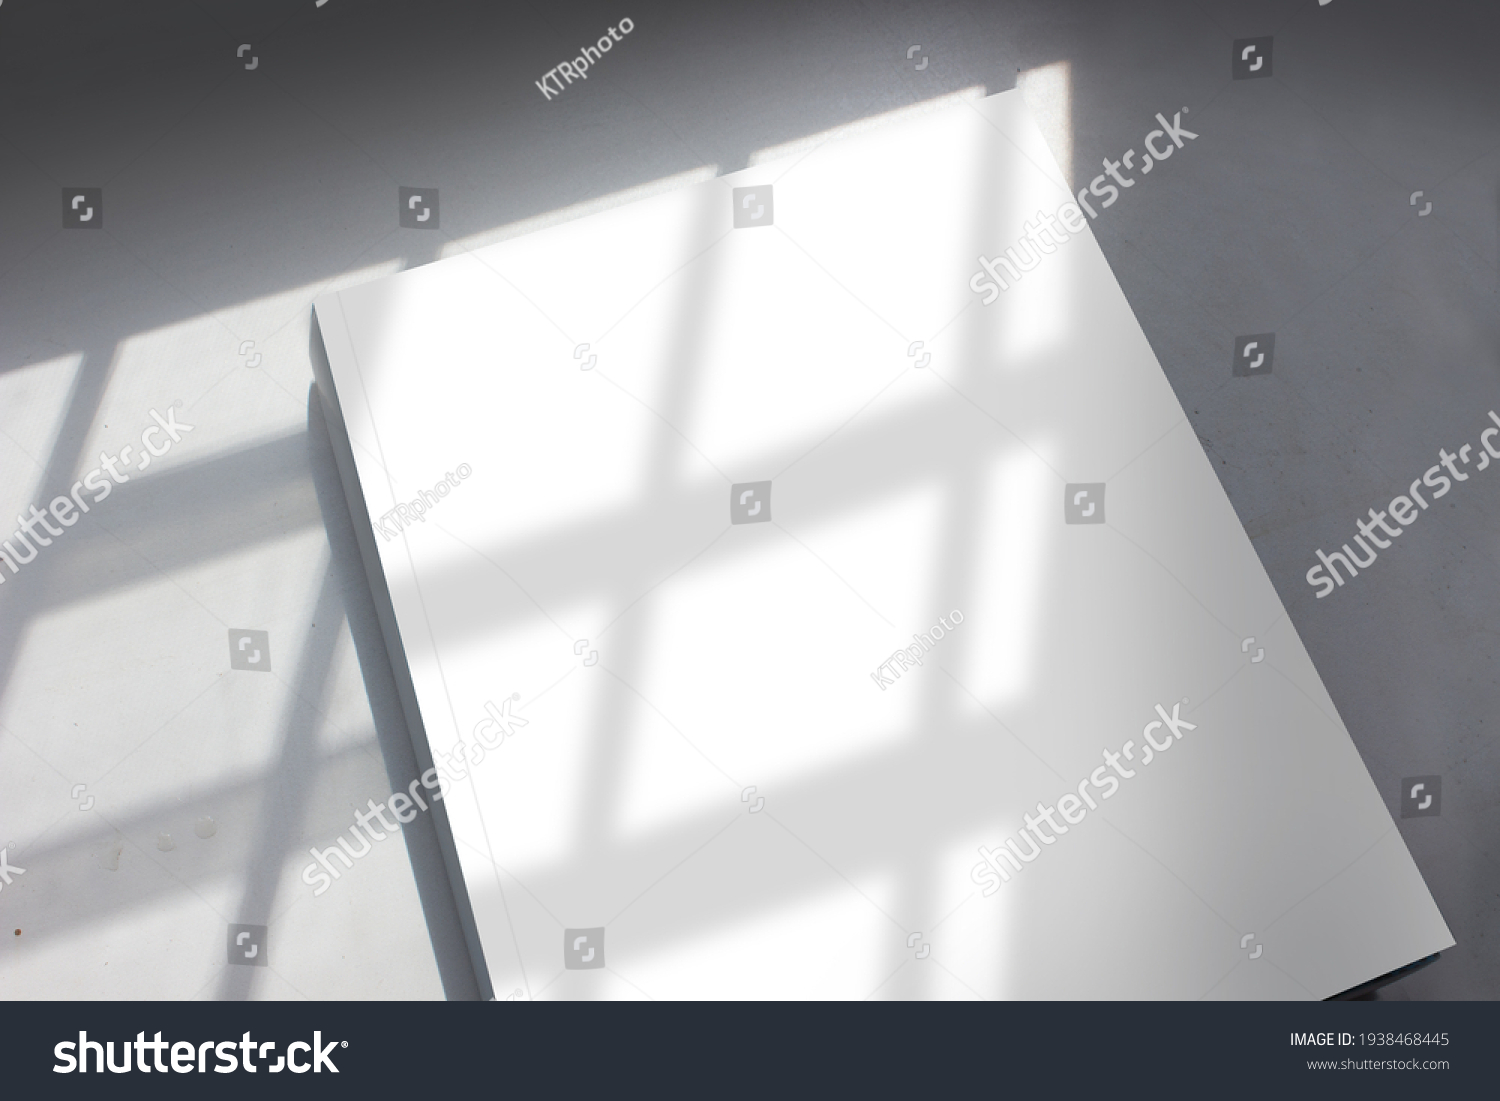 Blank cover page of the thick textbook in stripe pattern shadow from daylight for modern arts, design, or architecture publishing advertising mockup. #1938468445